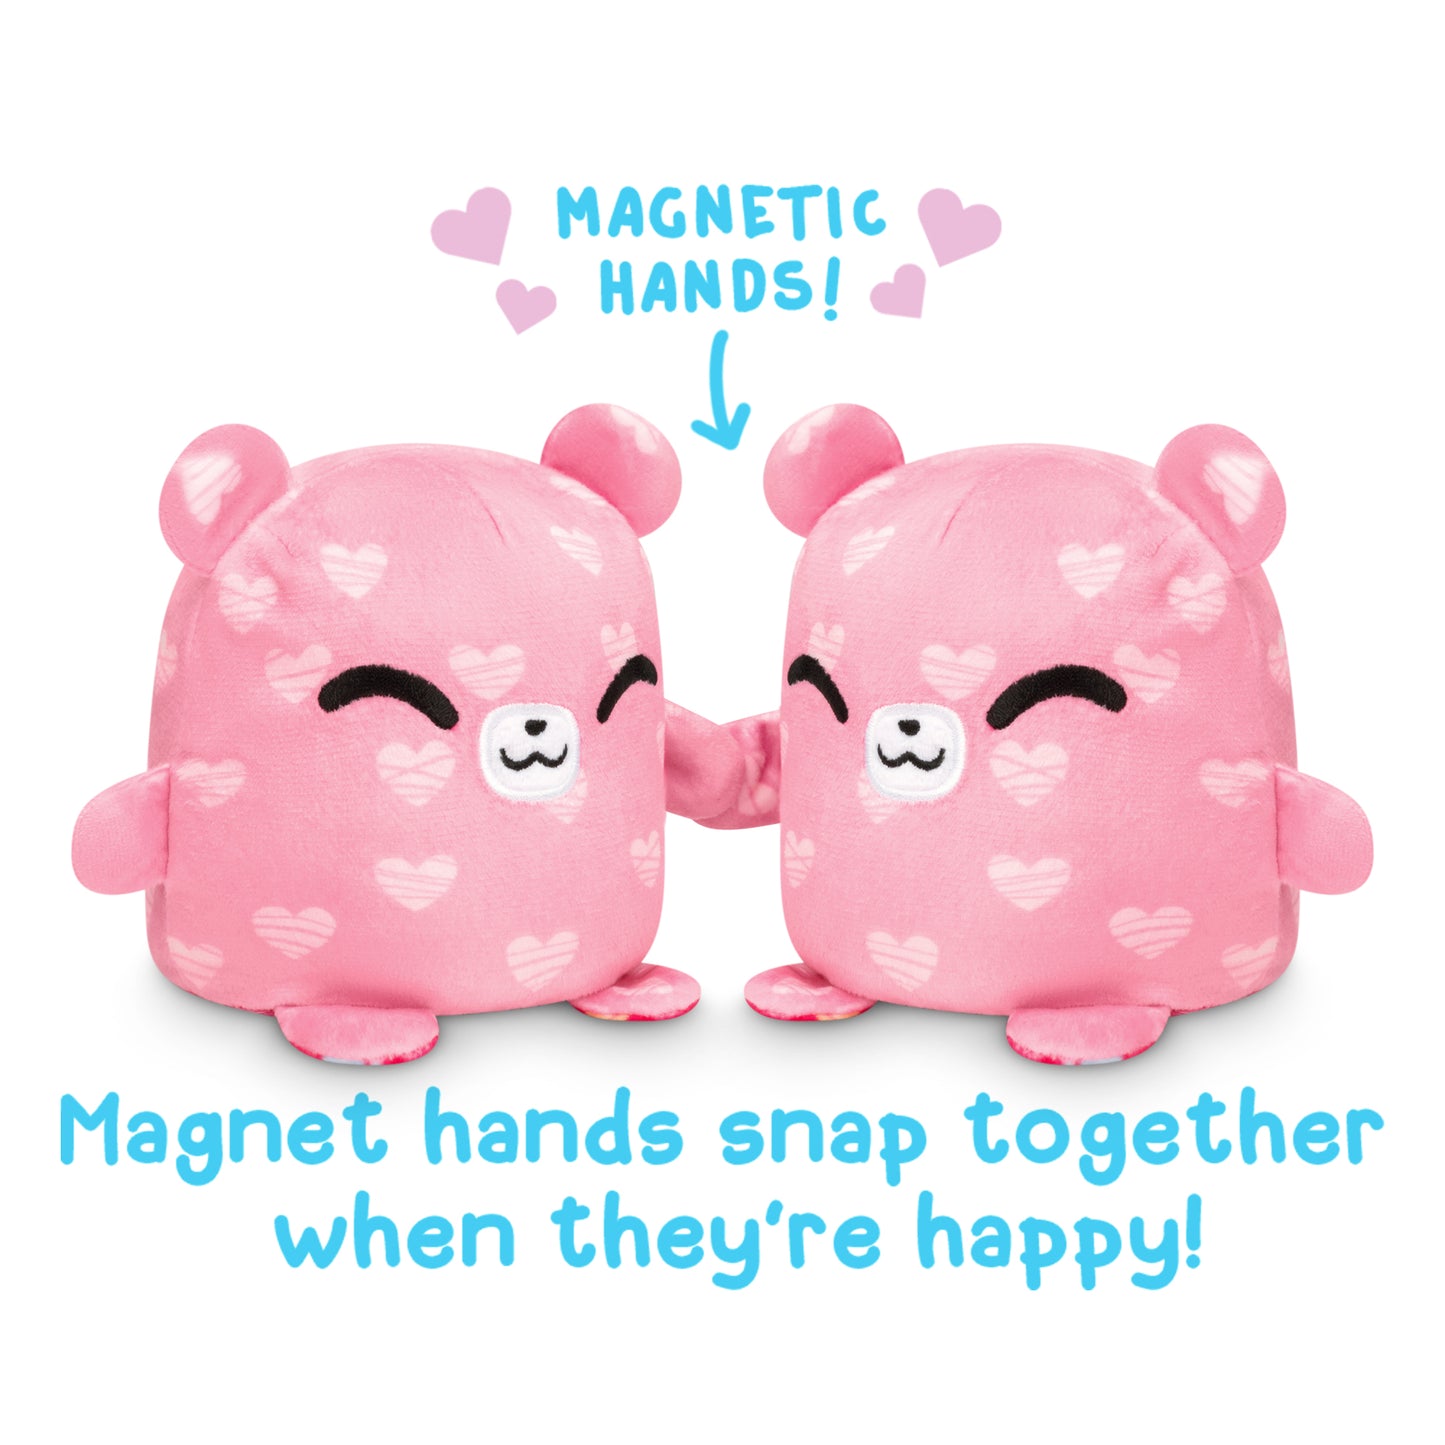 TeeTurtle Reversible Bear Plushmate (Hearts) - pink teddy bear with magnetic hands snap together when happy.